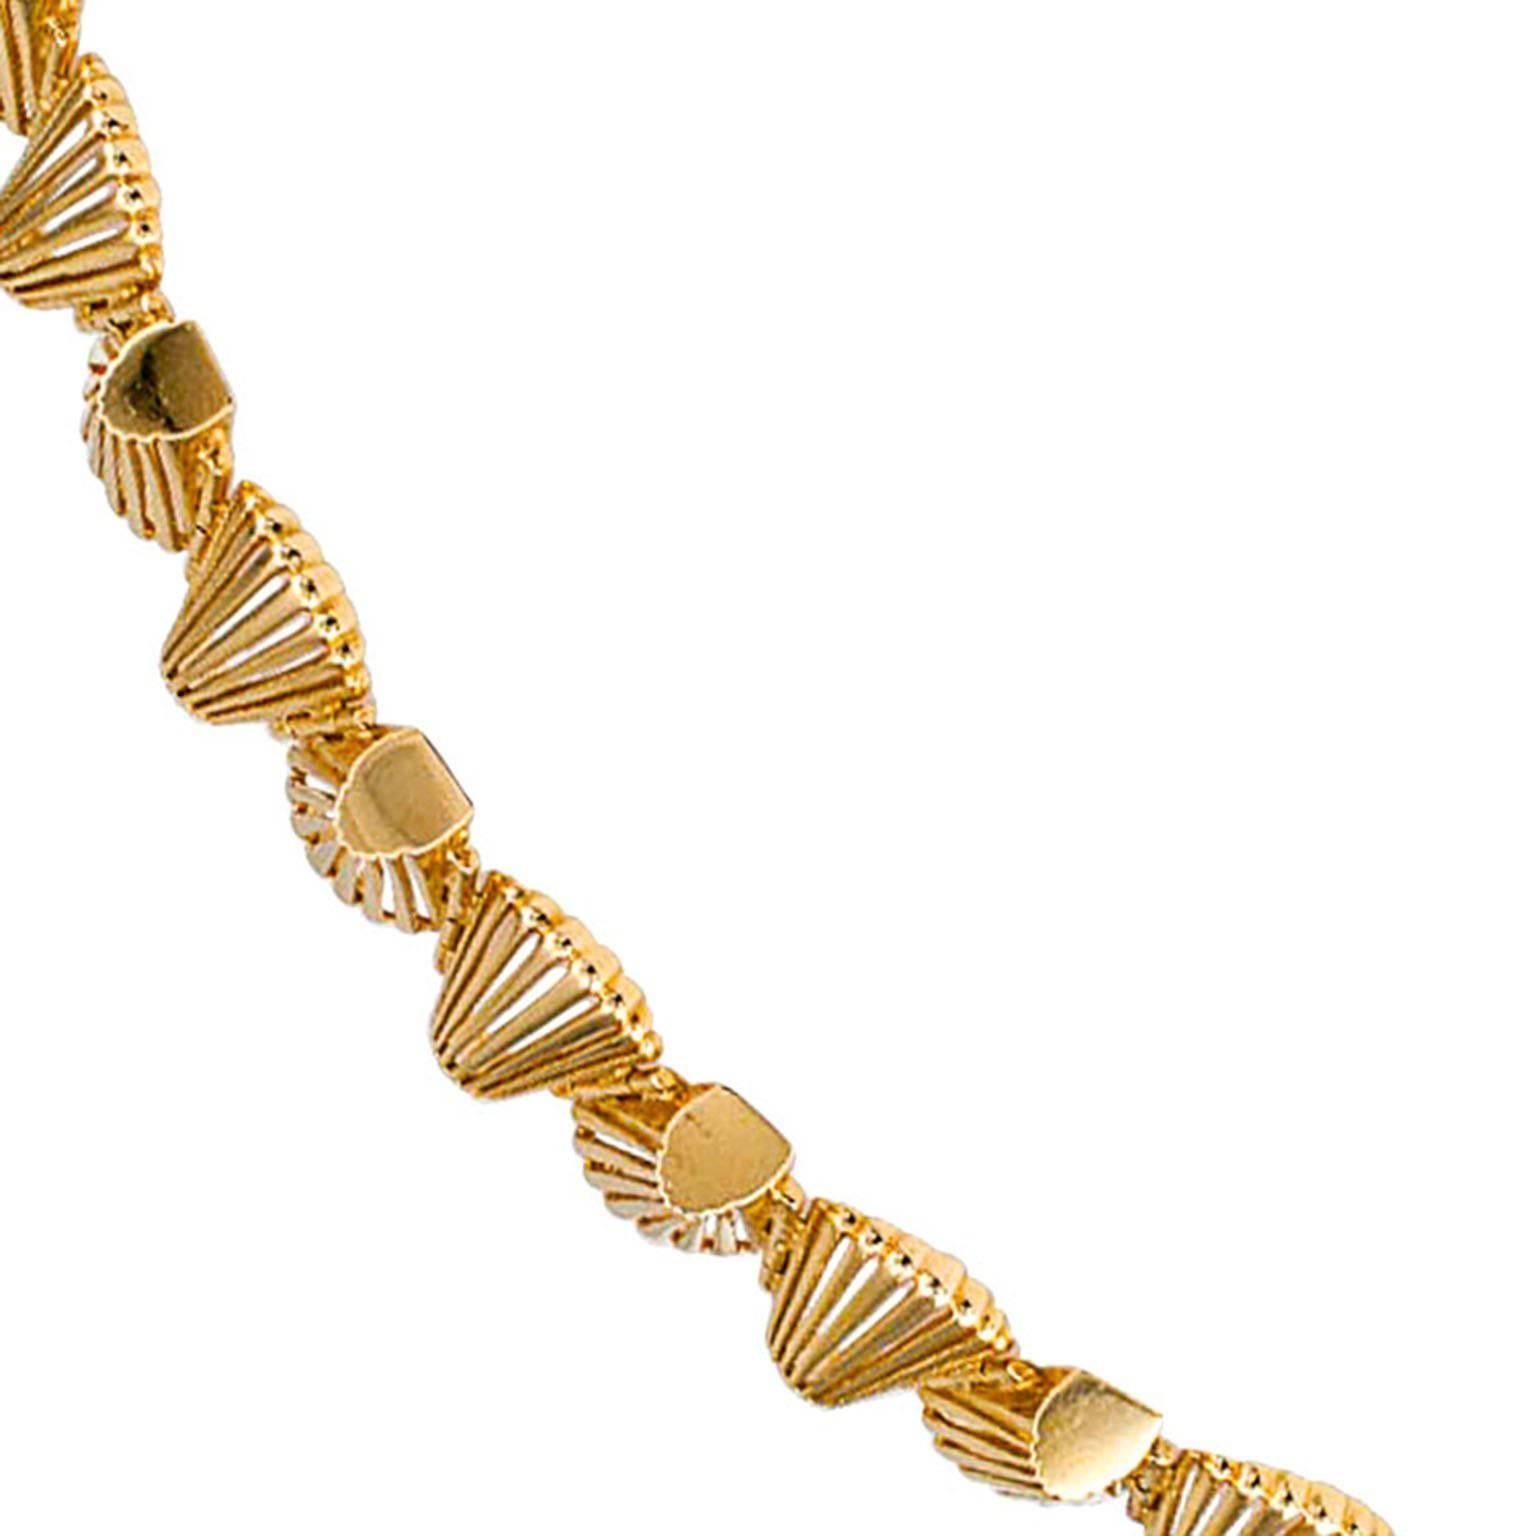 1960's Abstract Shell-Shaped Gold Link Bracelet

The design comprises a whimsical arrangement of open work, shell-shaped links that deliver a most gratifying visual effect... unconventional, different, like the woman who wears it.  Very, very easy